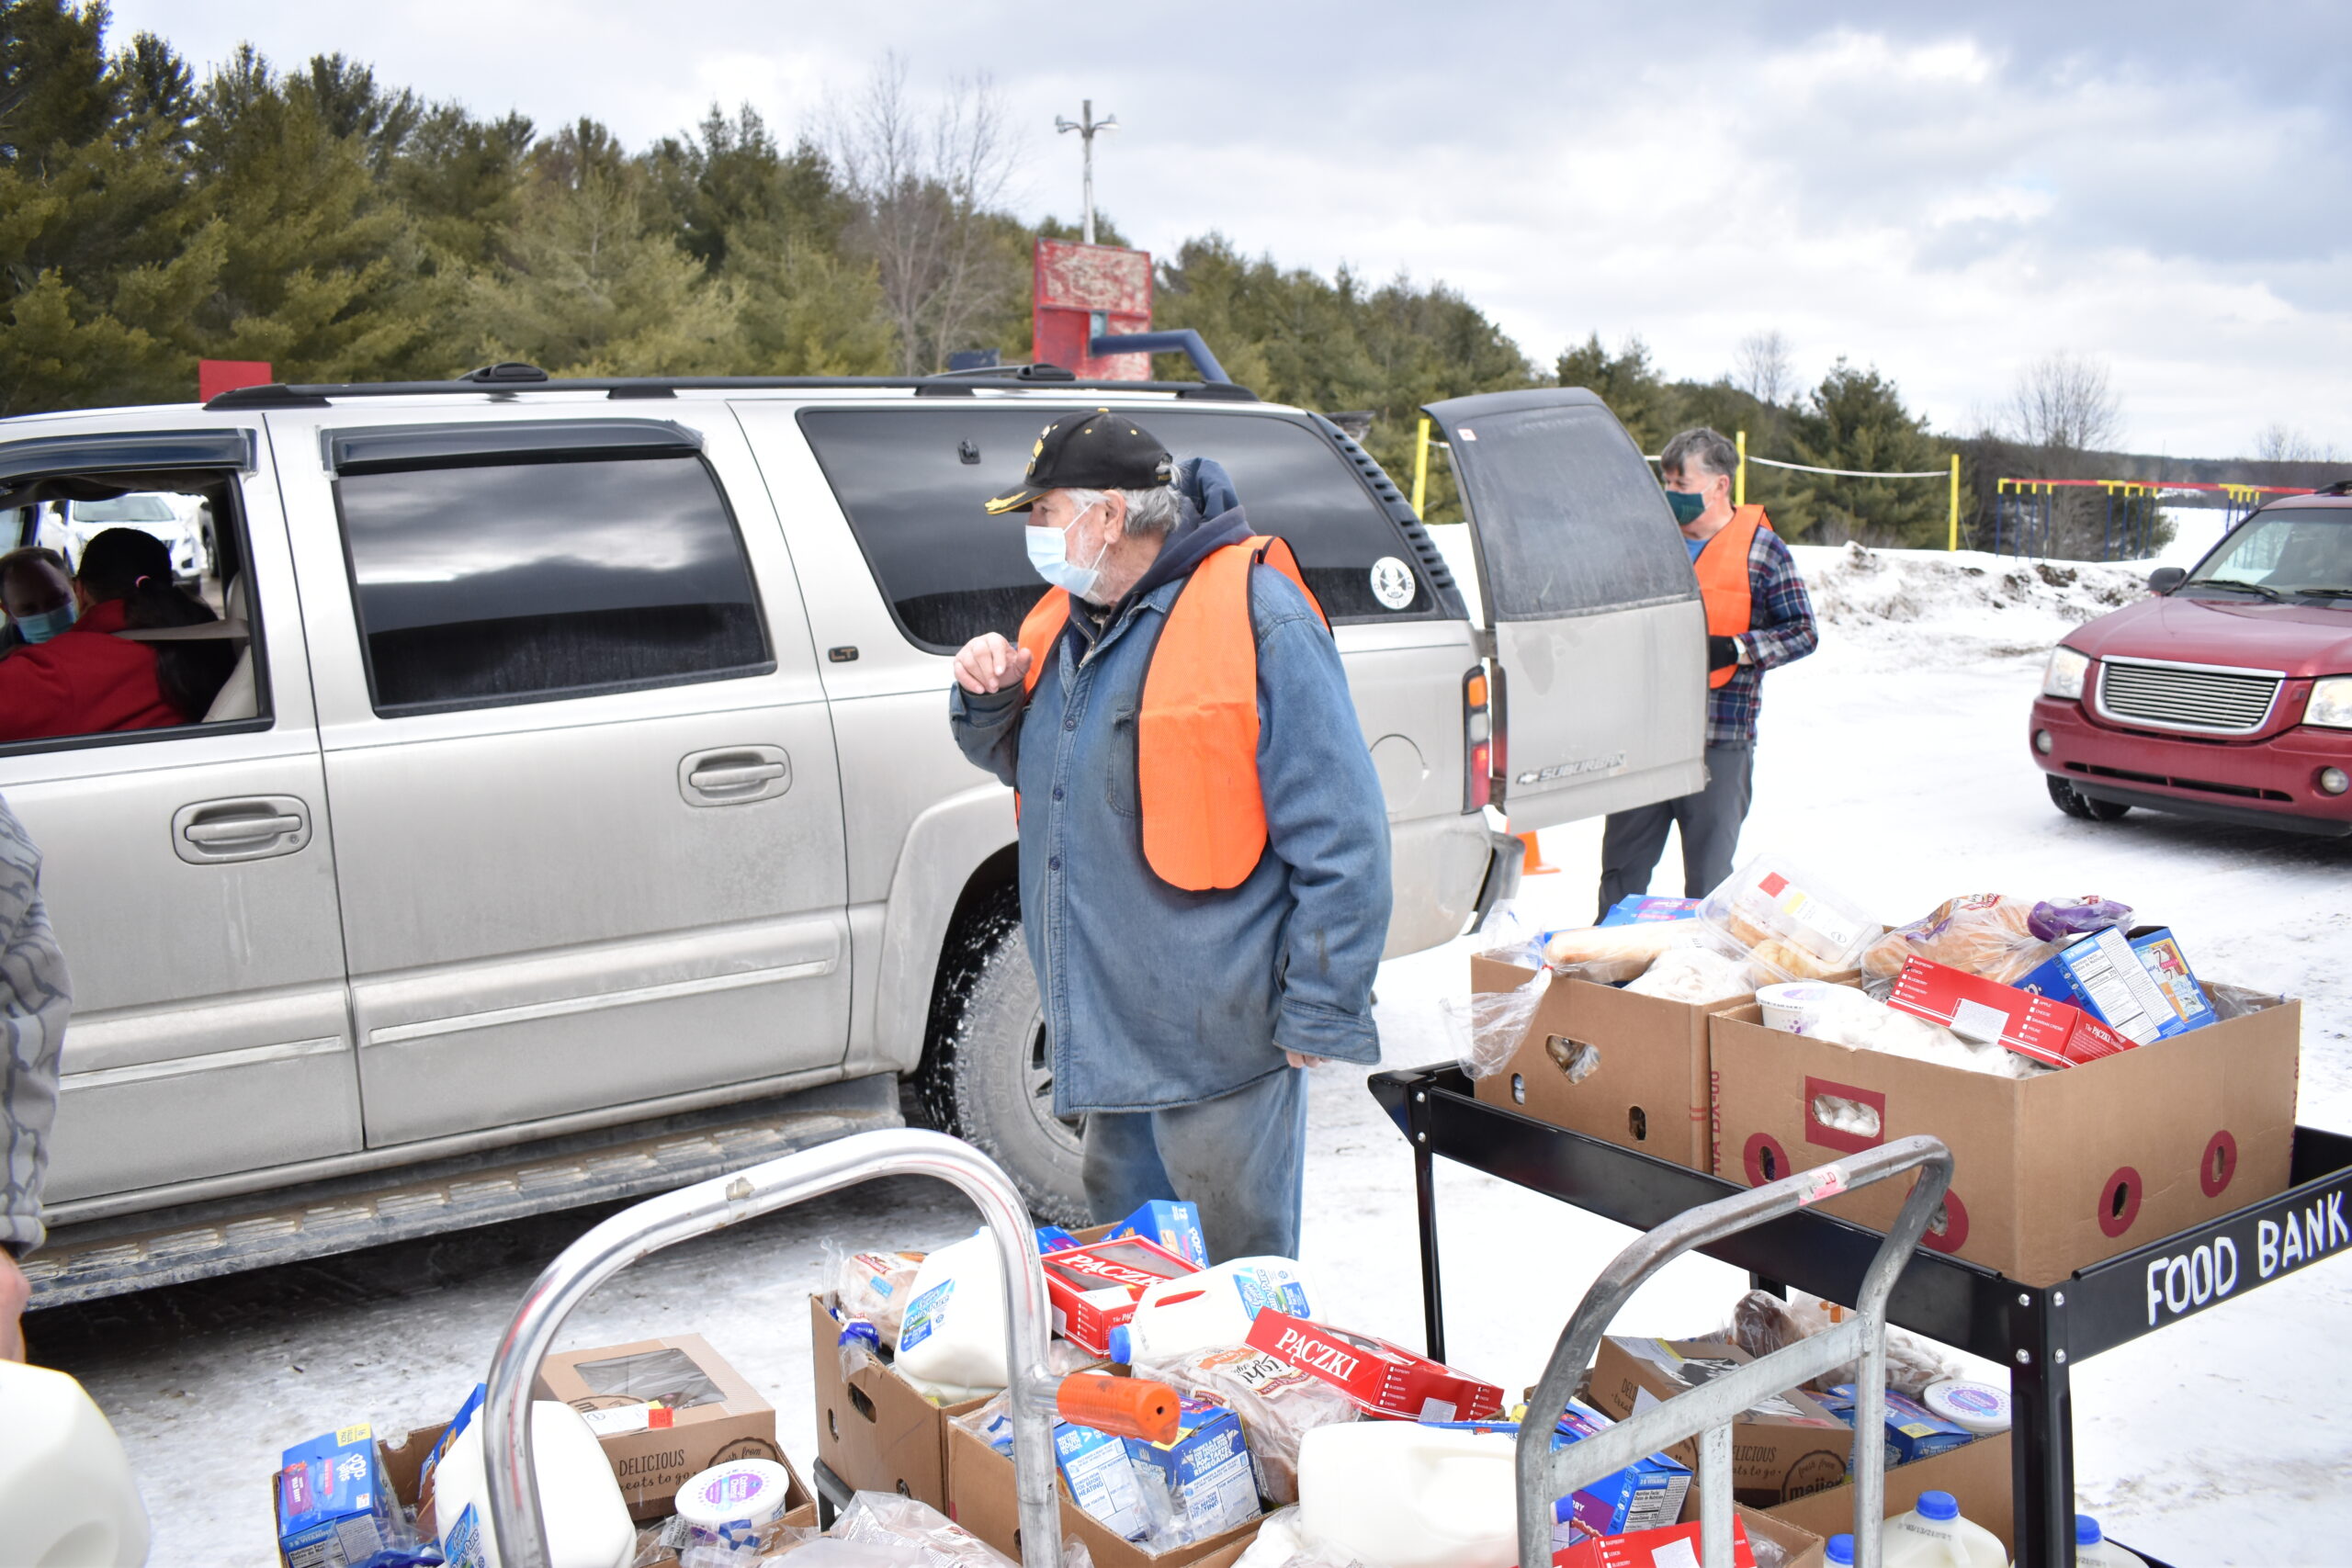 A volunteer loads a truck with food